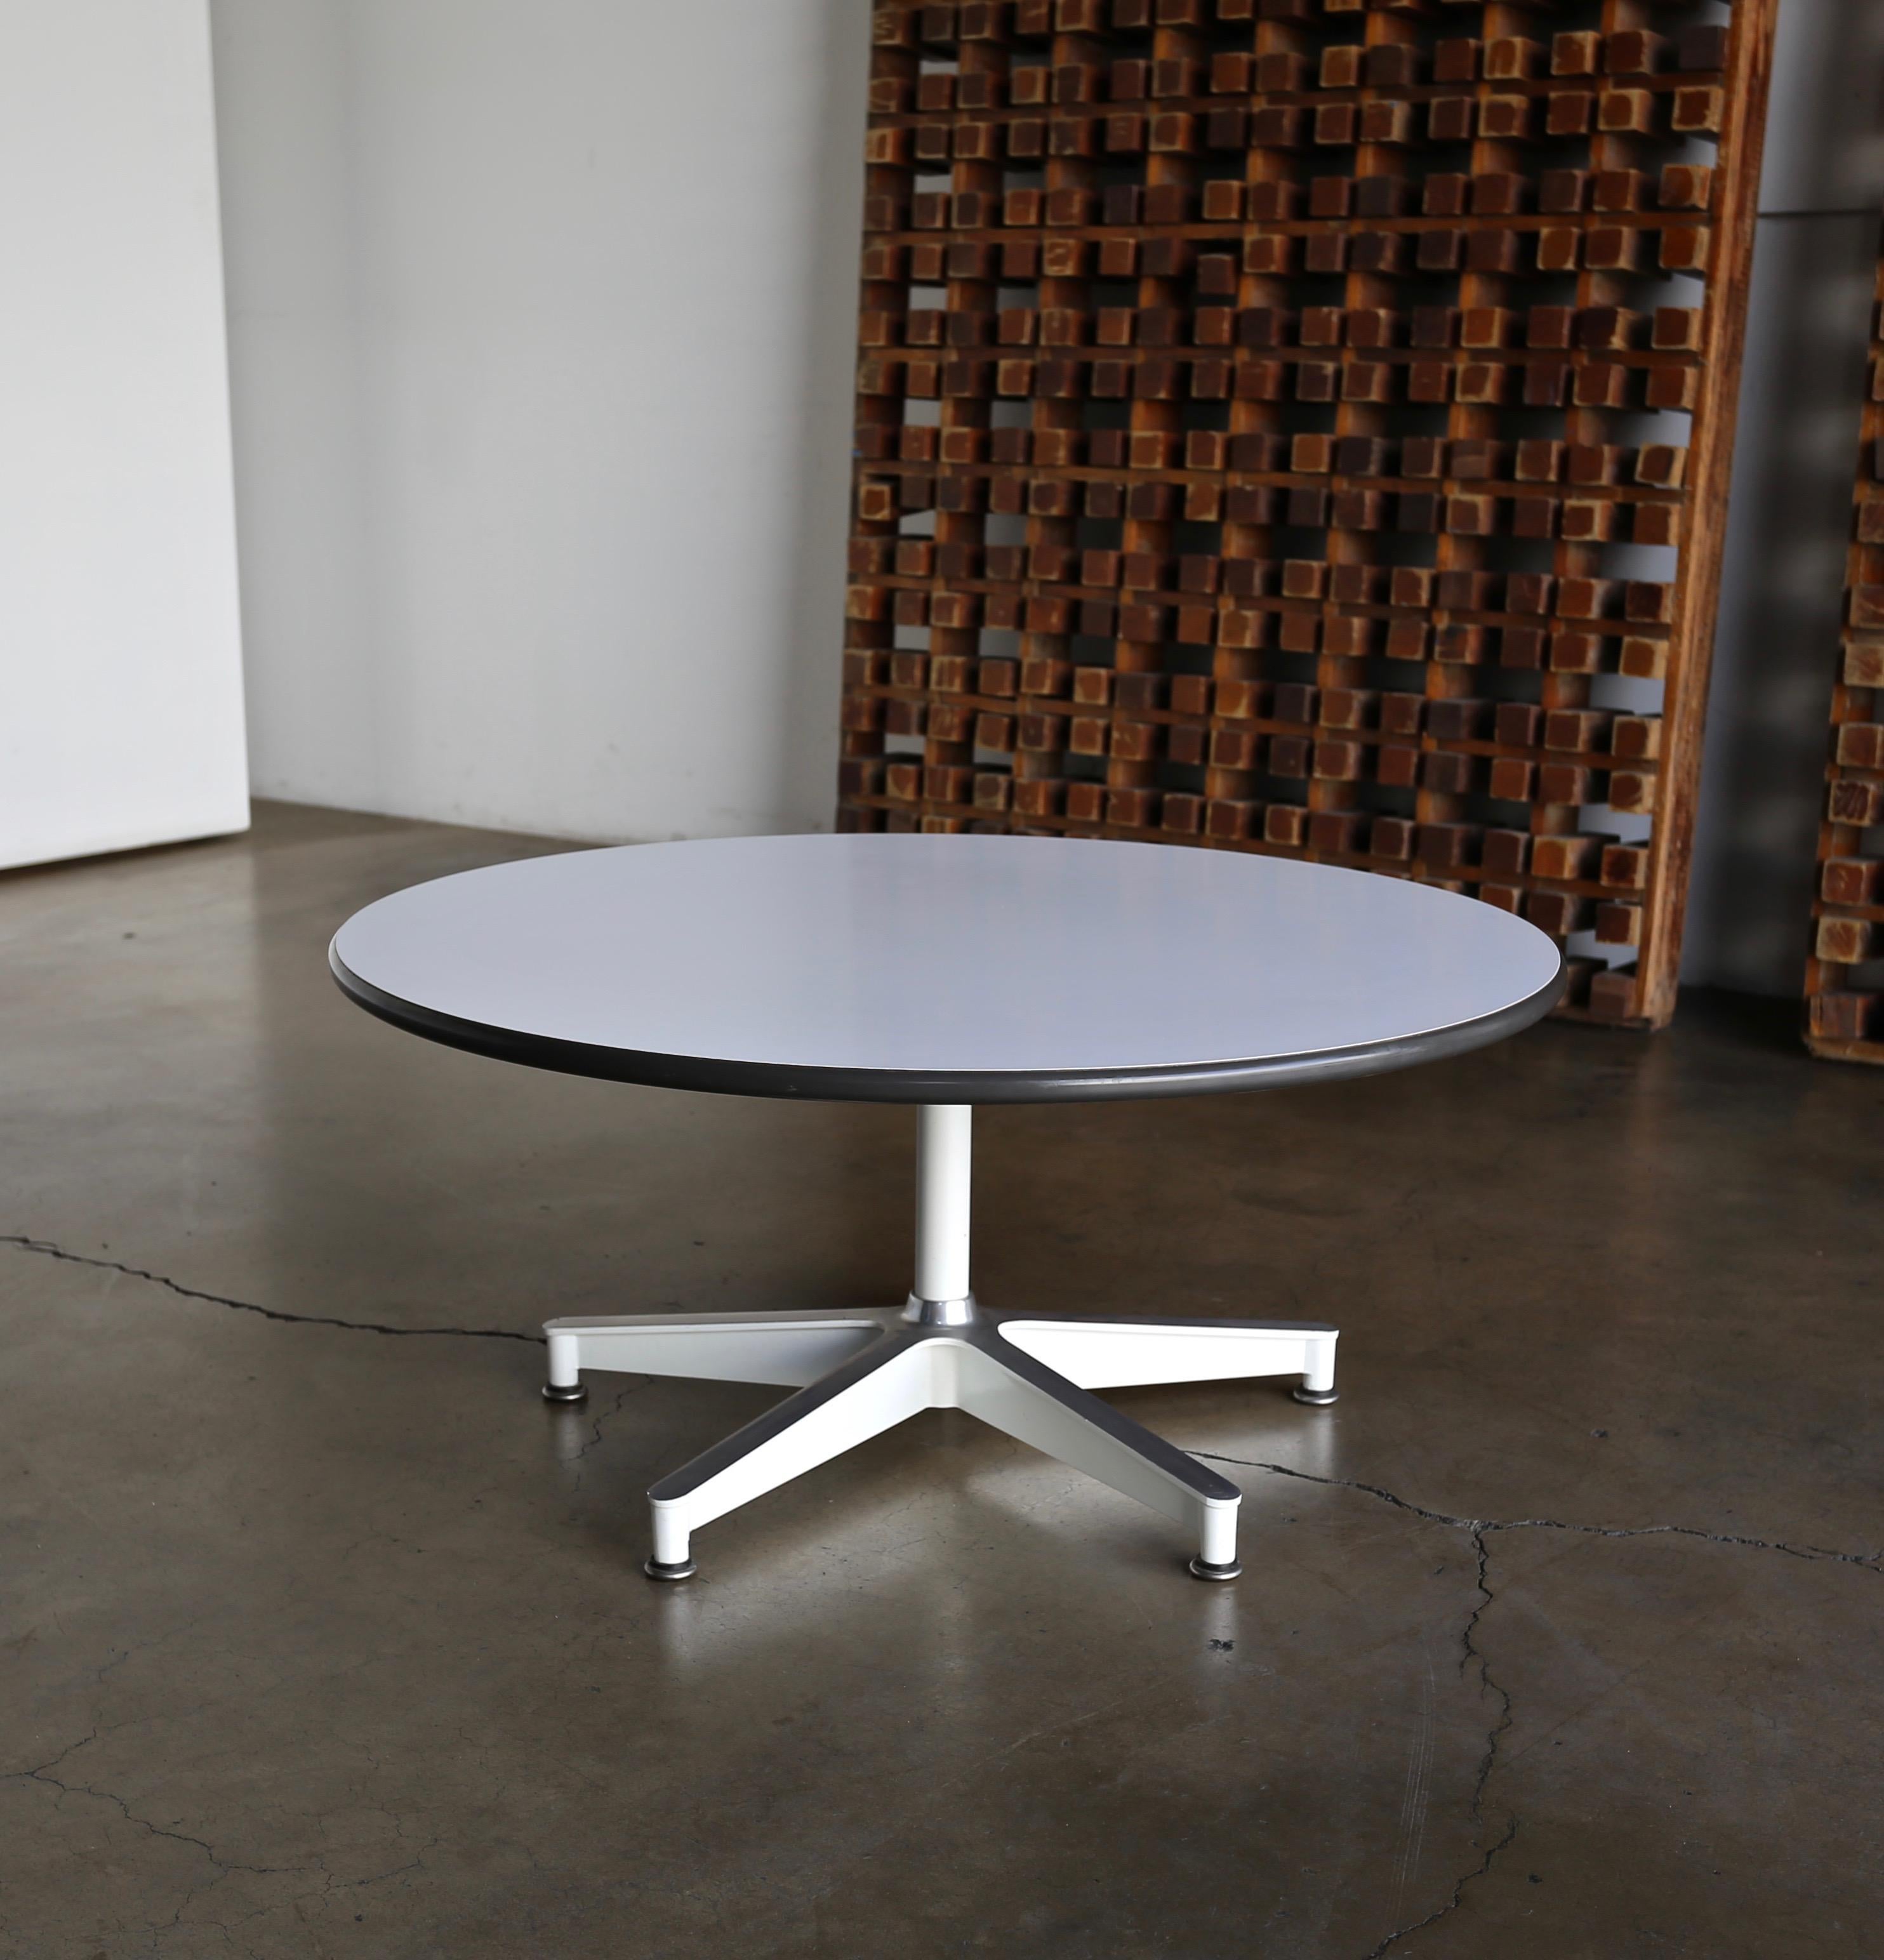 Charles Eames coffee table or side table for Herman Miller circa 1960.